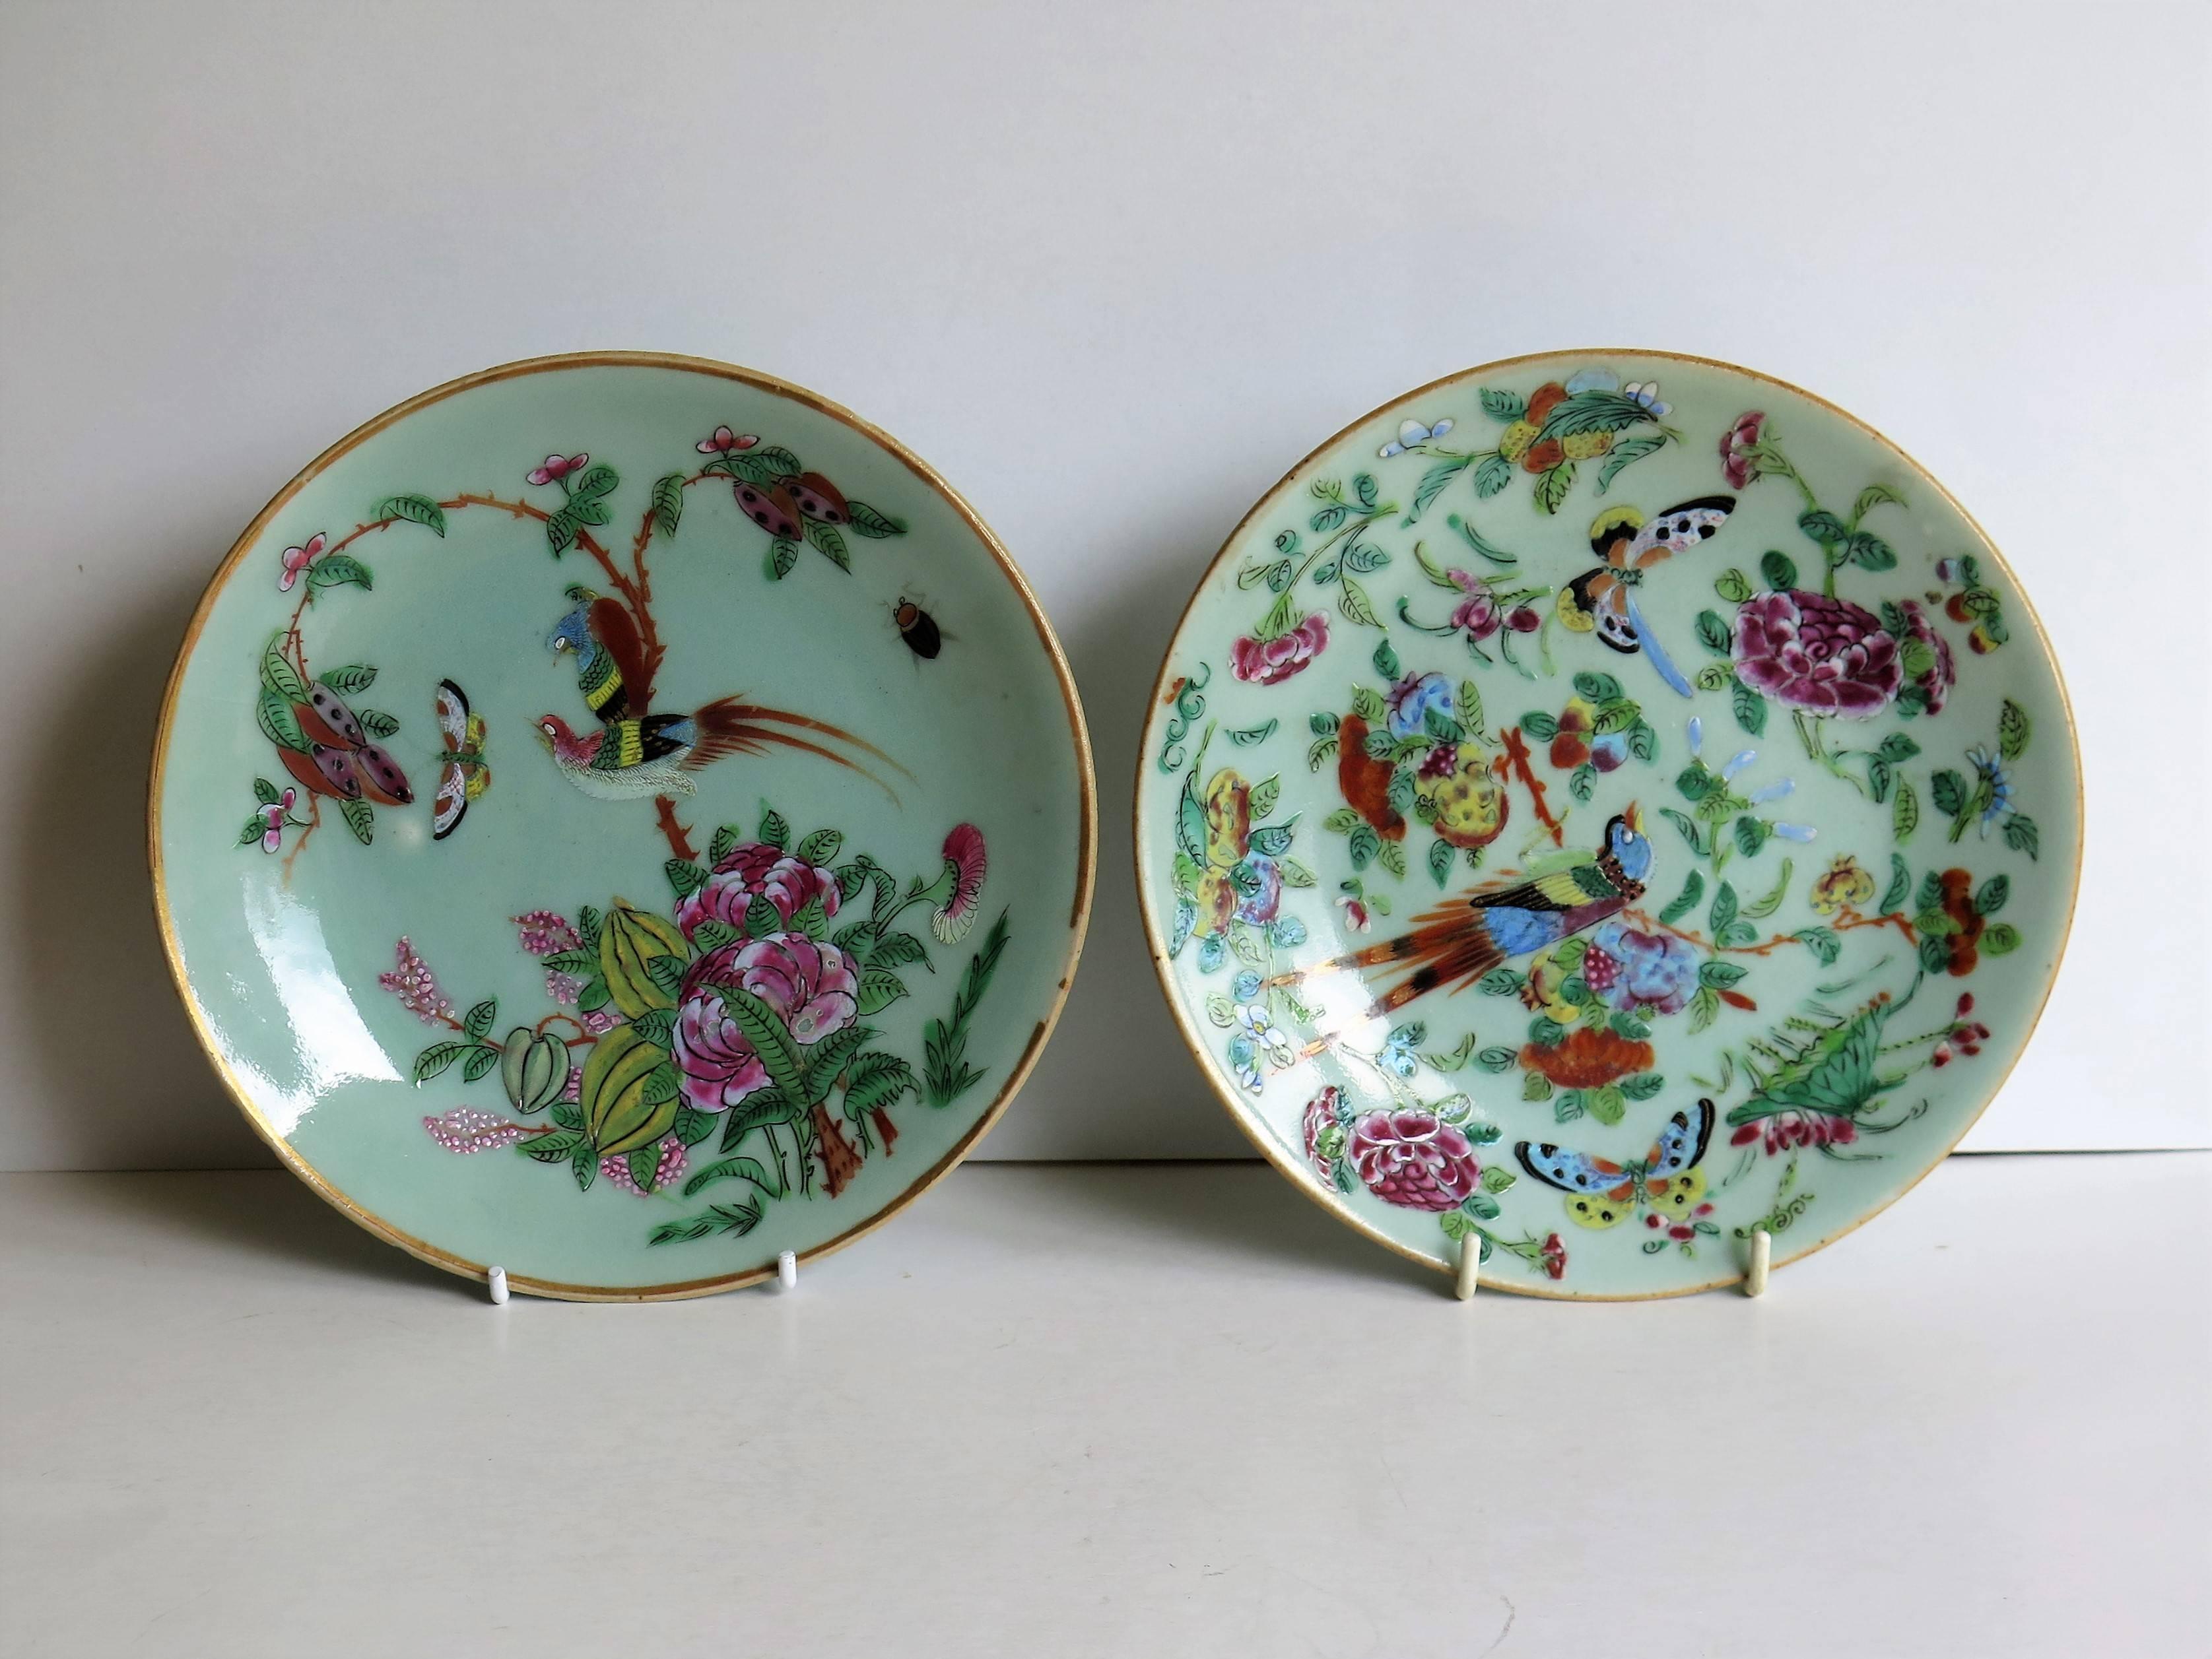 These are two 19th century Chinese export, (Canton) plates or dishes of the same style, type of decoration and size.

Each plate has a light green, Celadon ground with beautifully hand-painted decoration, in over-glaze poly-chrome enamels of the